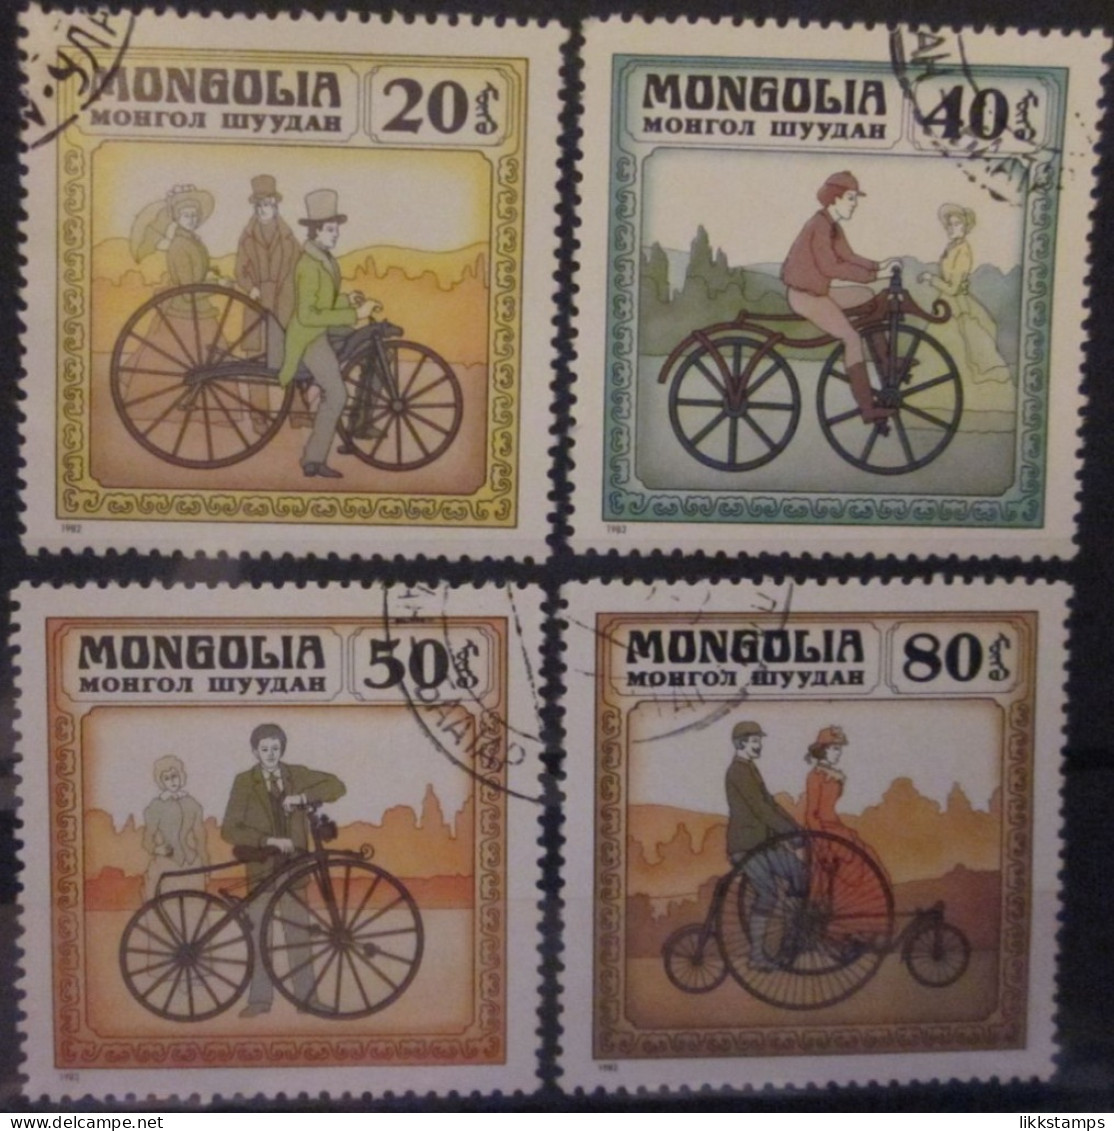 MONGOLIA ~ 1982 ~ S.G. NUMBERS 1432 - 1433 + 1435, ~ BICYCLES. ~ VFU #03480 - Mongolei